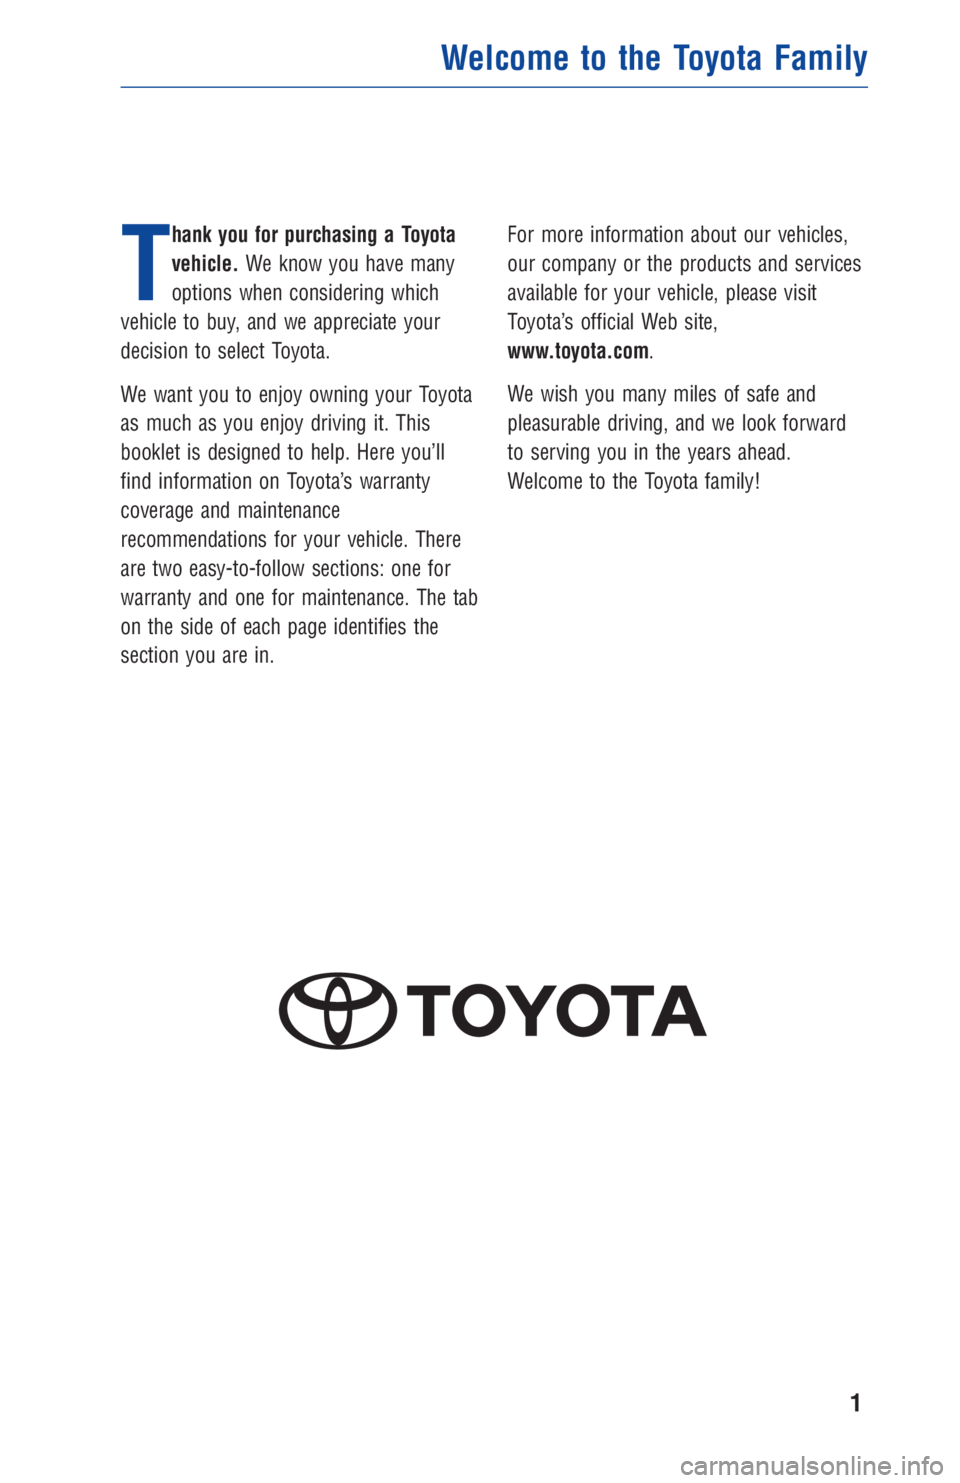 TOYOTA HIGHLANDER 2018  Warranties & Maintenance Guides (in English) T
hank you for purchasing a Toyota
vehicle.We know you have many
options when considering which
vehicle to buy, and we appreciate your
decision to select Toyota.
We want you to enjoy owning your Toyot